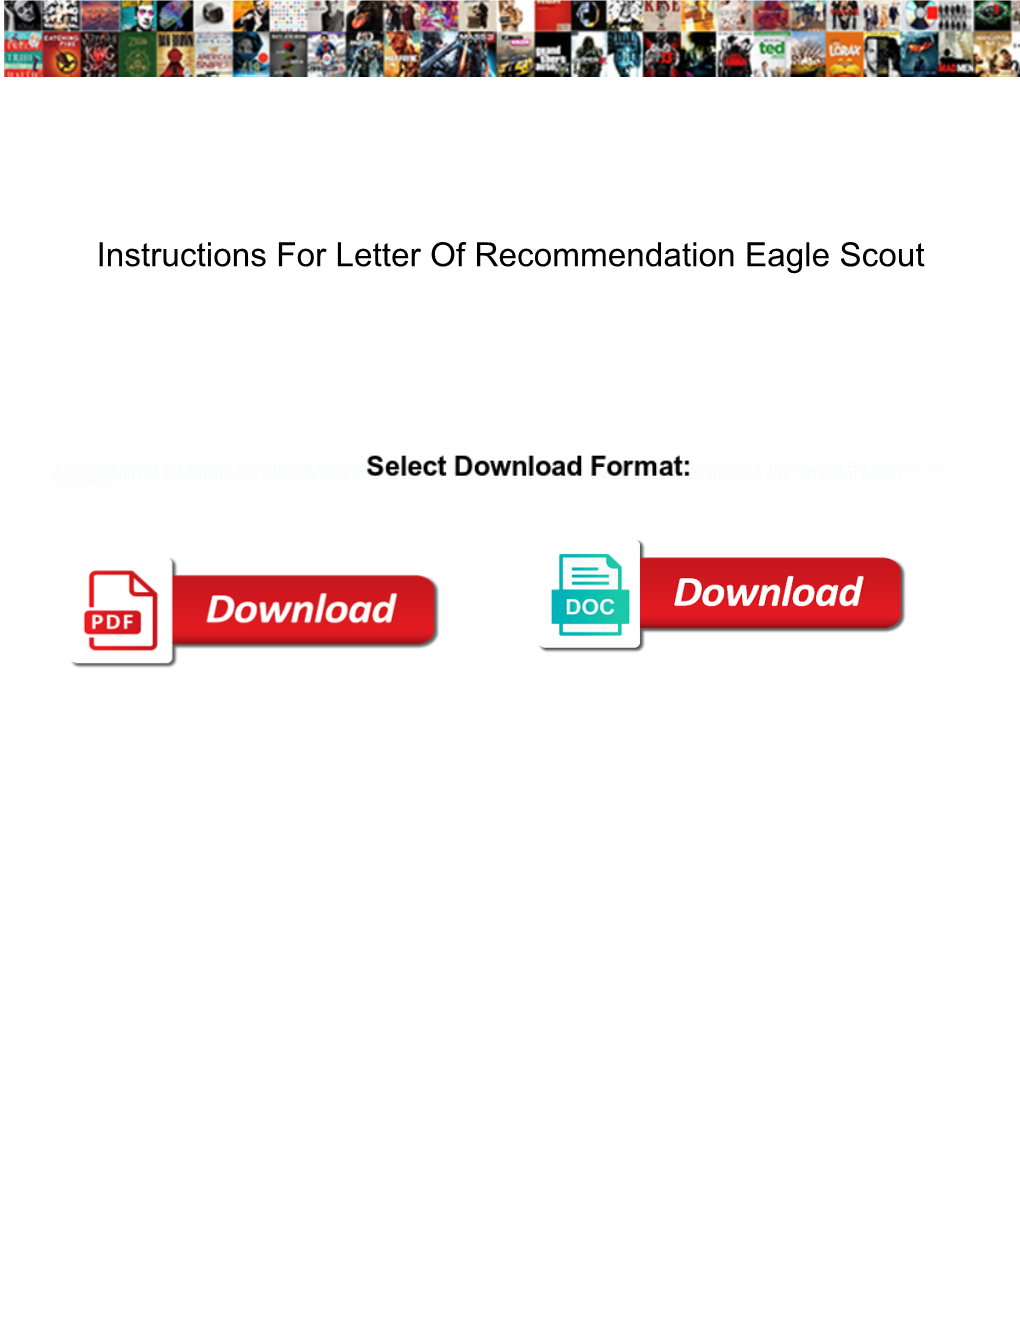 Instructions for Letter of Recommendation Eagle Scout